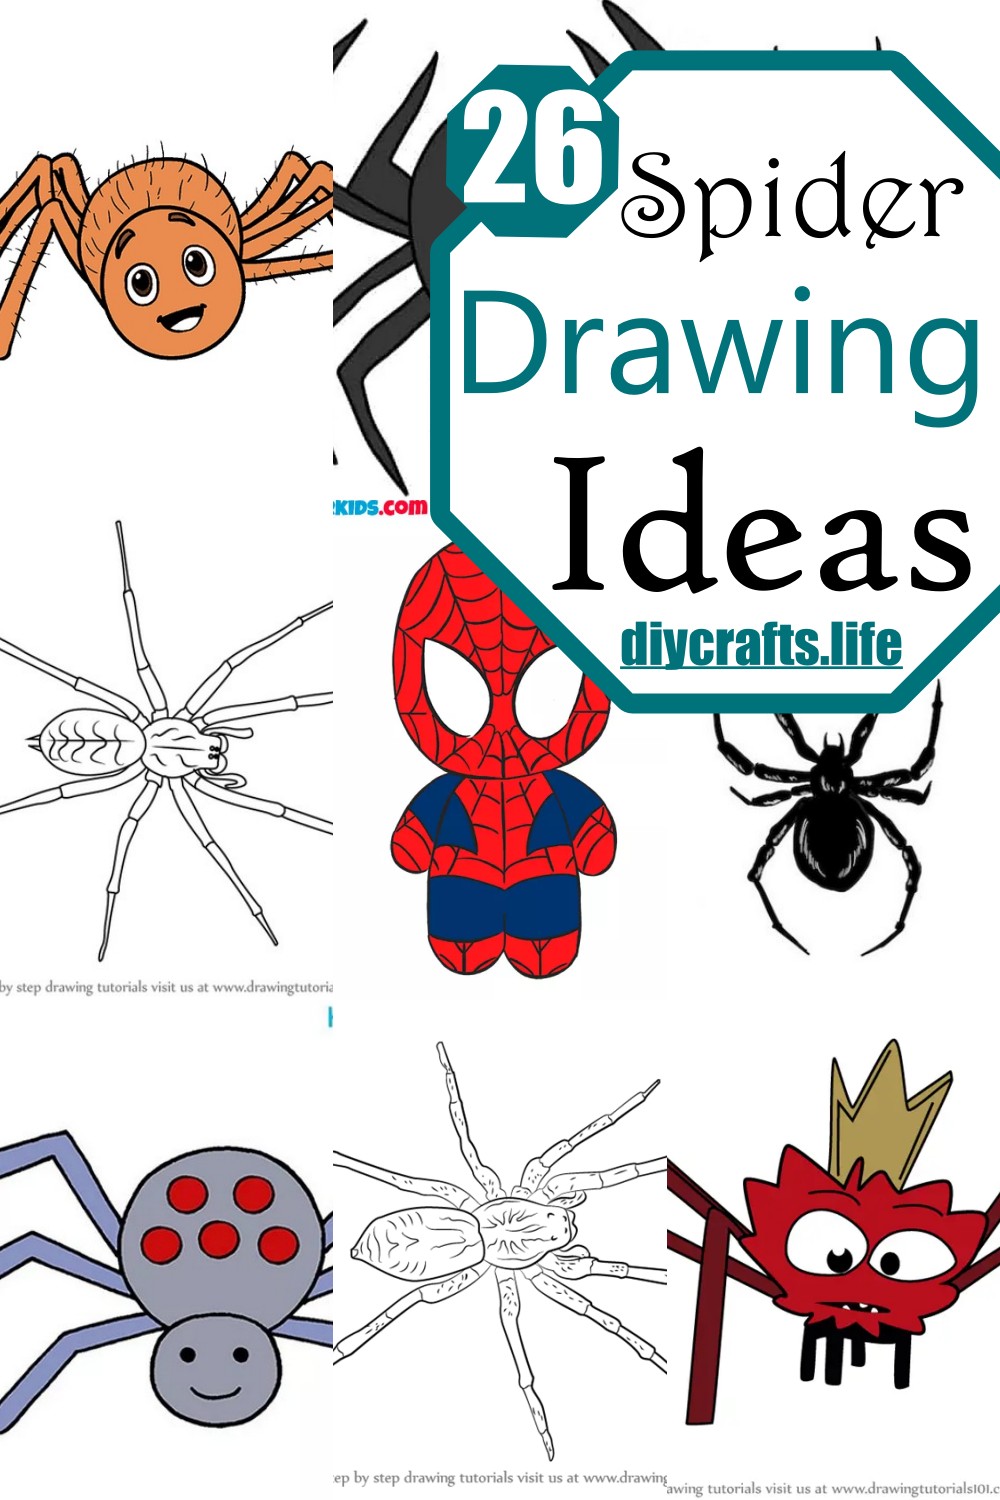 Spider Drawing Ideas